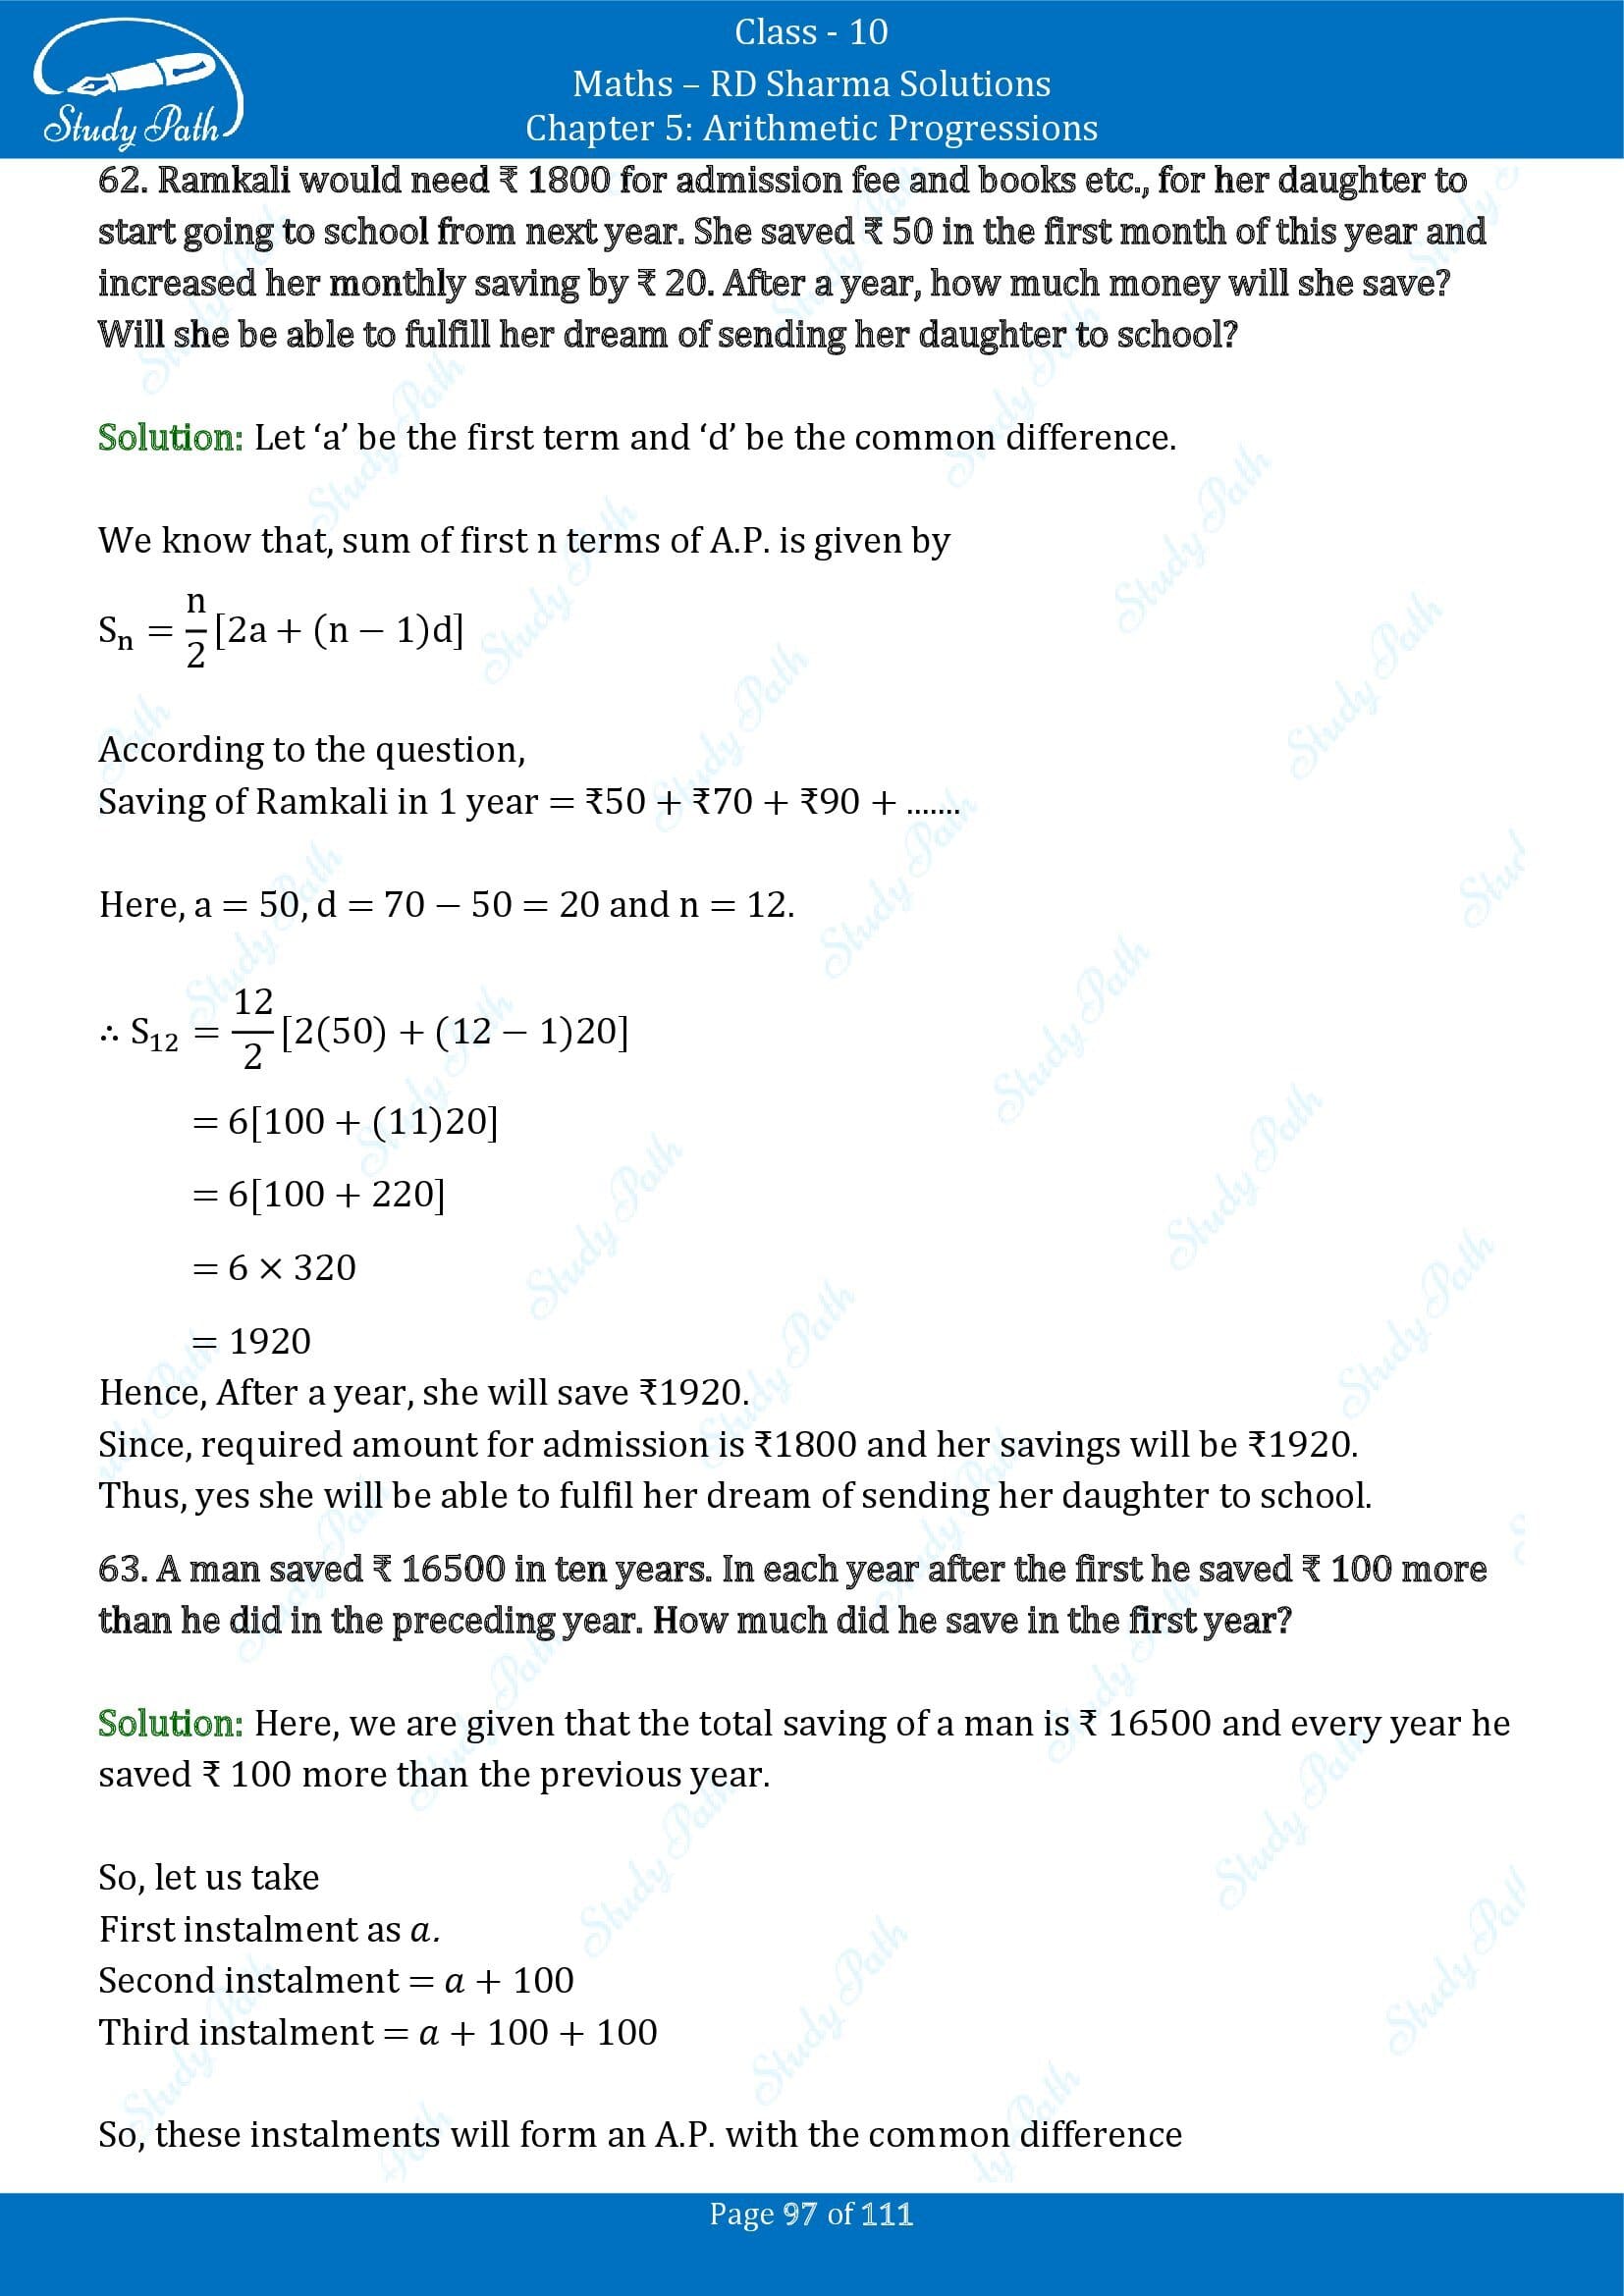 RD Sharma Solutions Class 10 Chapter 5 Arithmetic Progressions Exercise 5.6 00097